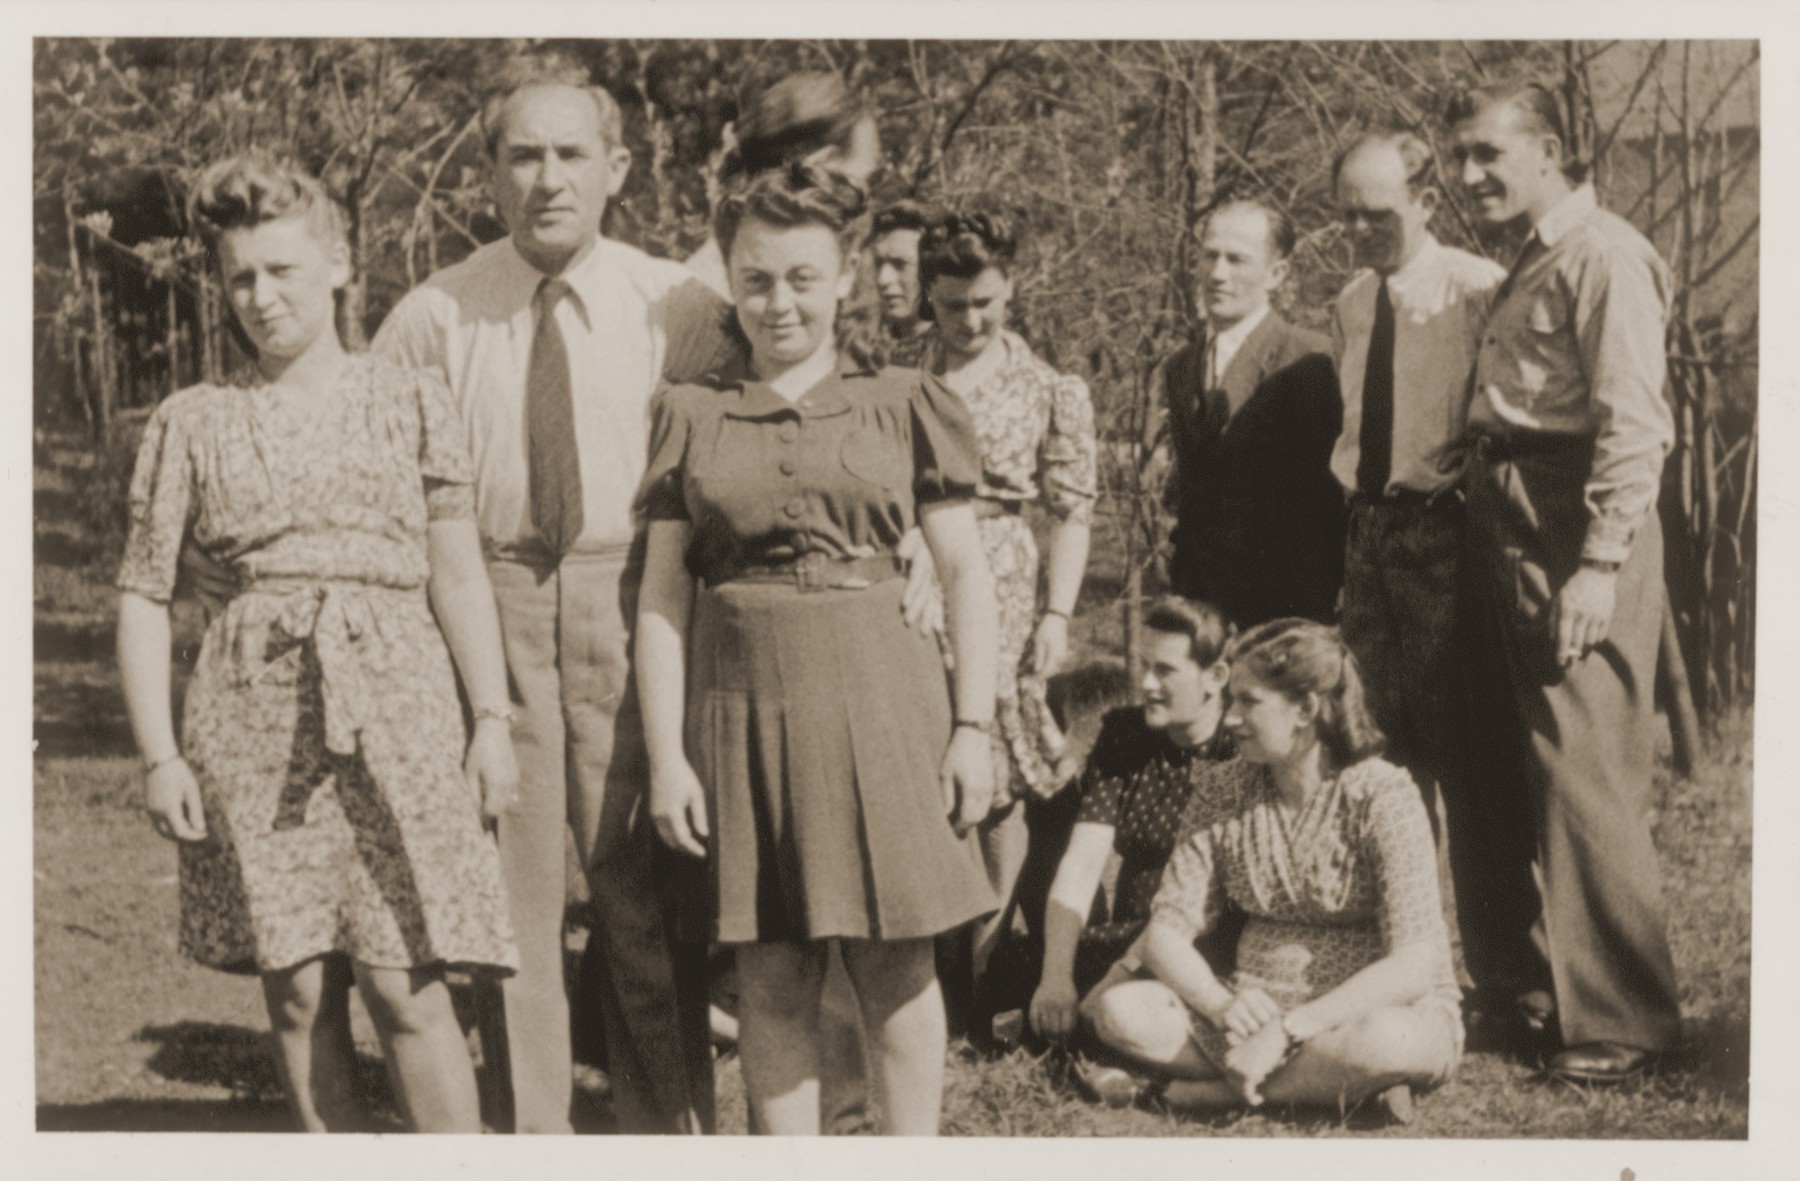 A group of Jewish DPs at the Schlachtensee displaced persons camp.  

Standing from left to right are: Guta Tencer, Moses Tencer, Chana Tencer, Pola Zyngier, Moshe Frymerman, Rachmiel Zyngier, and unidentified.  Seated from left to right are: Renia (Kilman) Frymerman and Eva (Kilman) Zyngier.

Verso is signed "Hania."